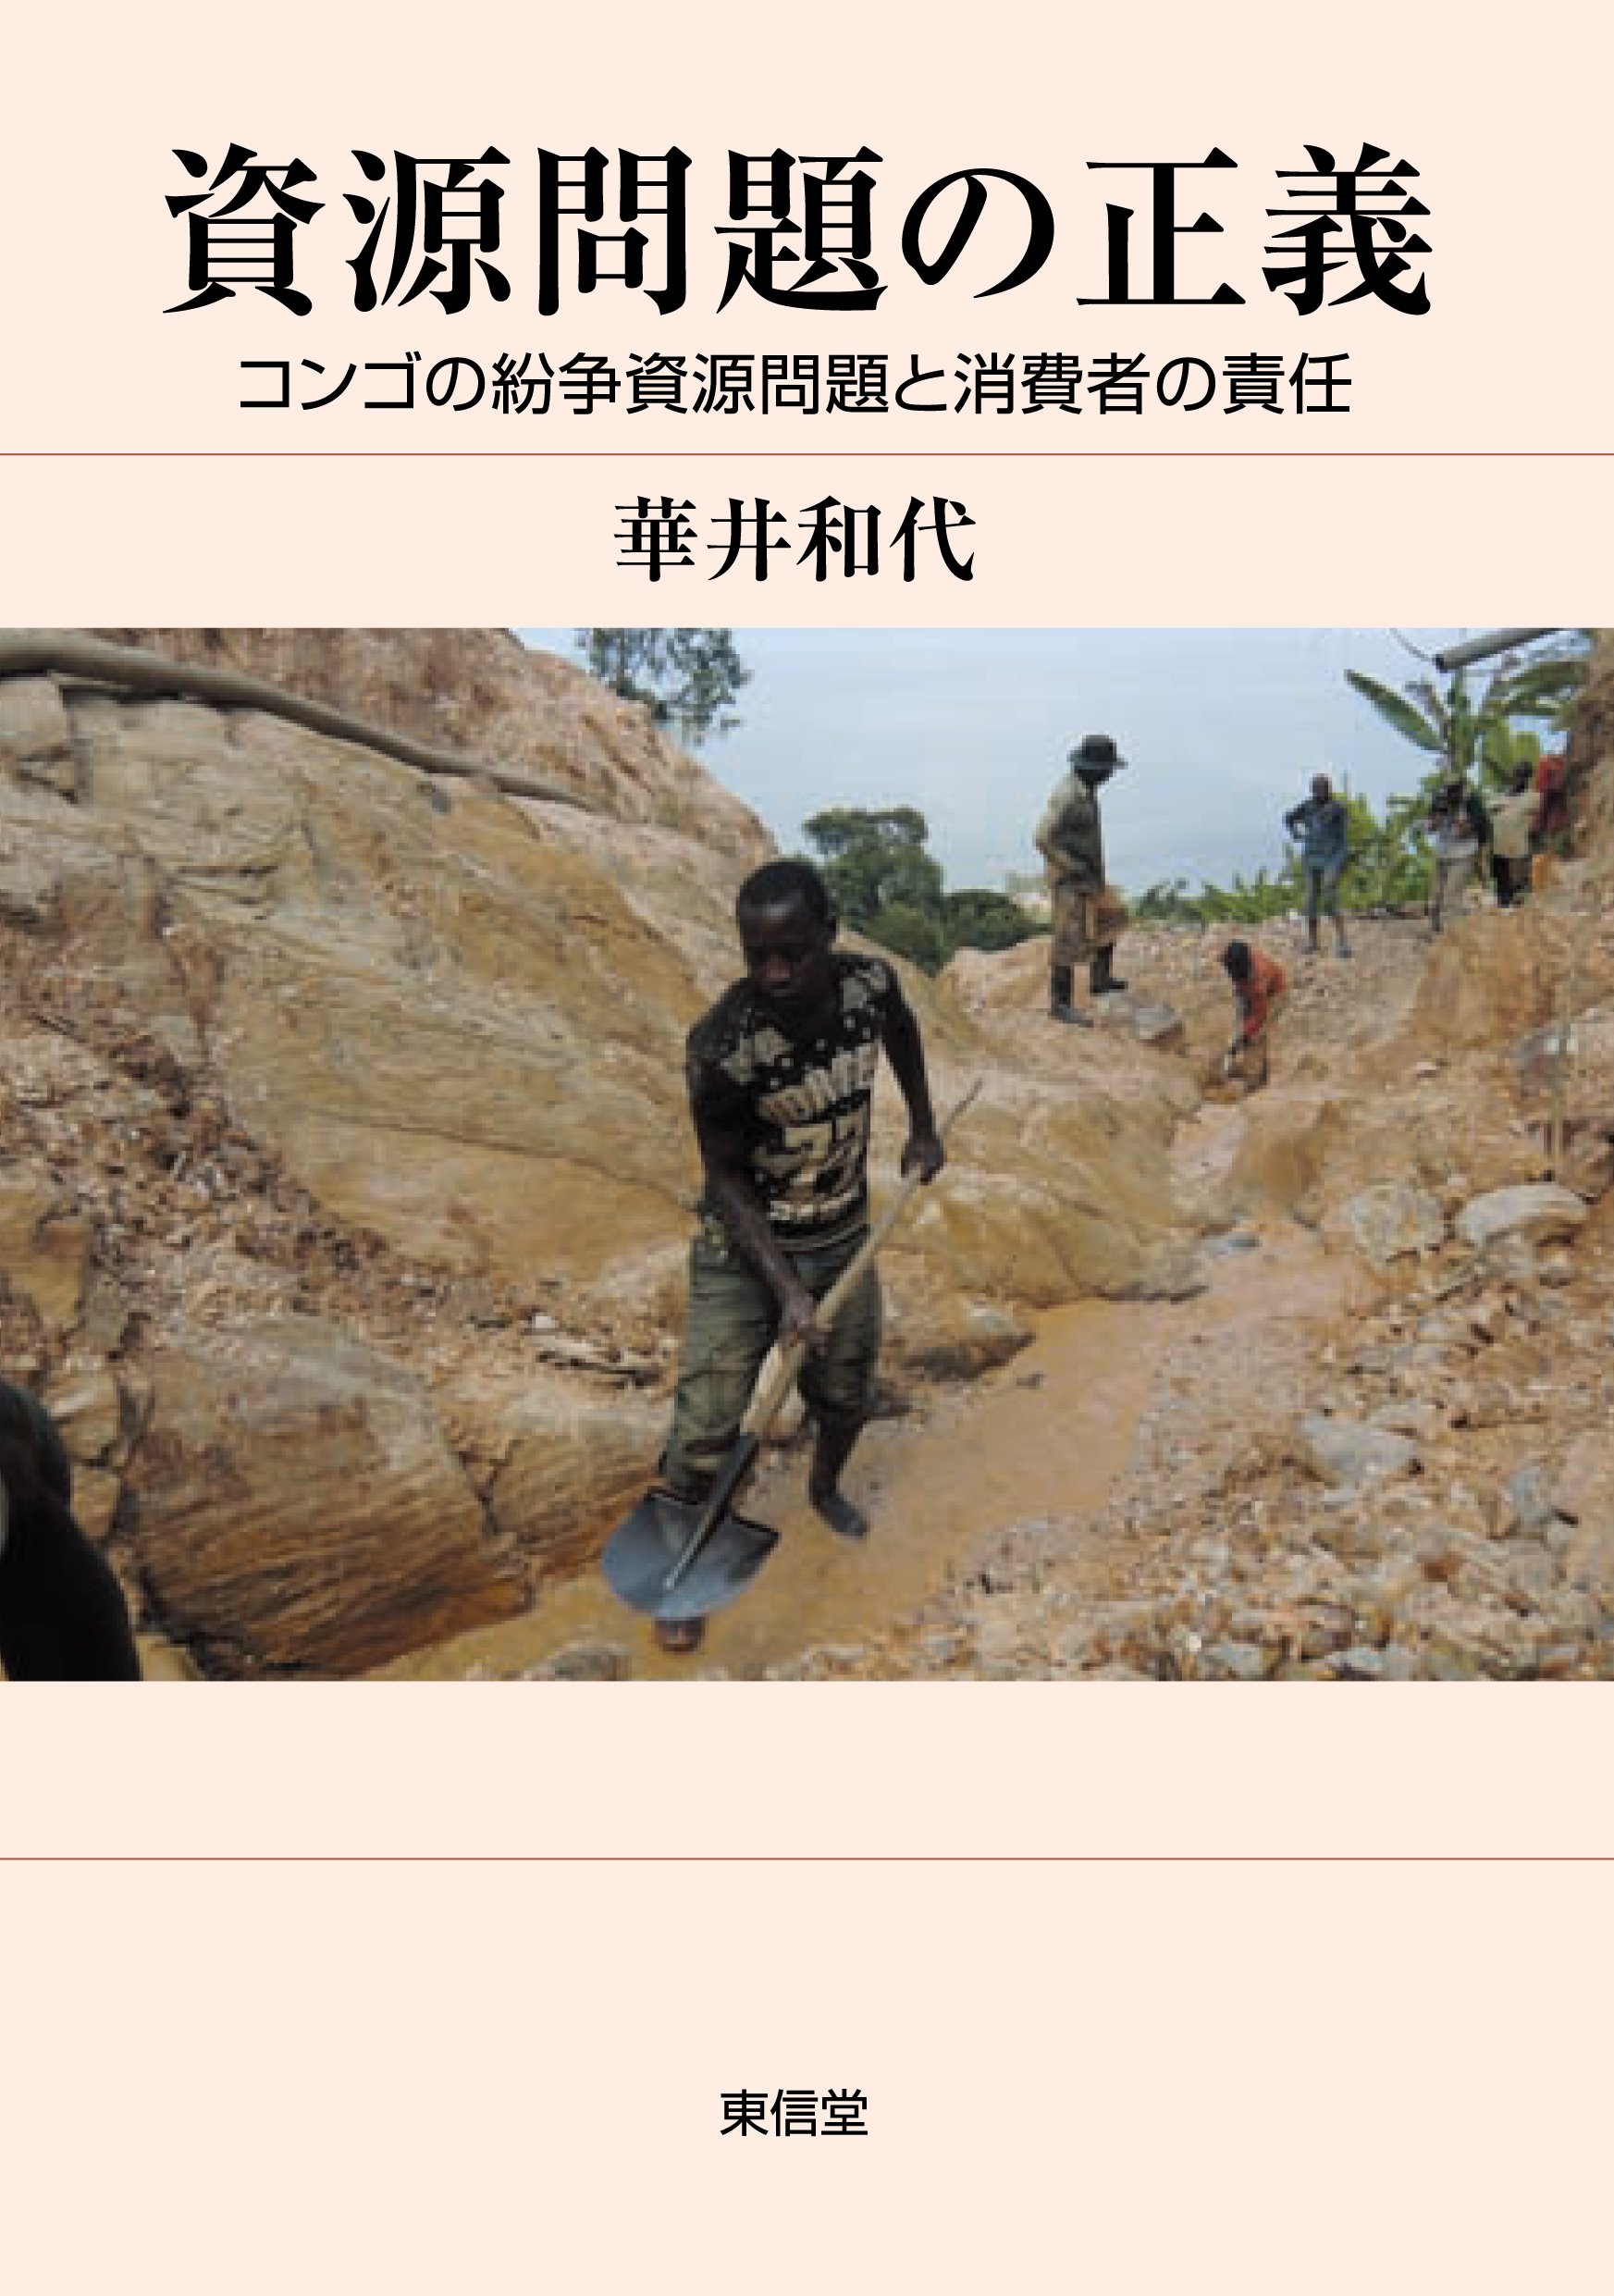 Light pink cover with a picture of Congo doing labor work.